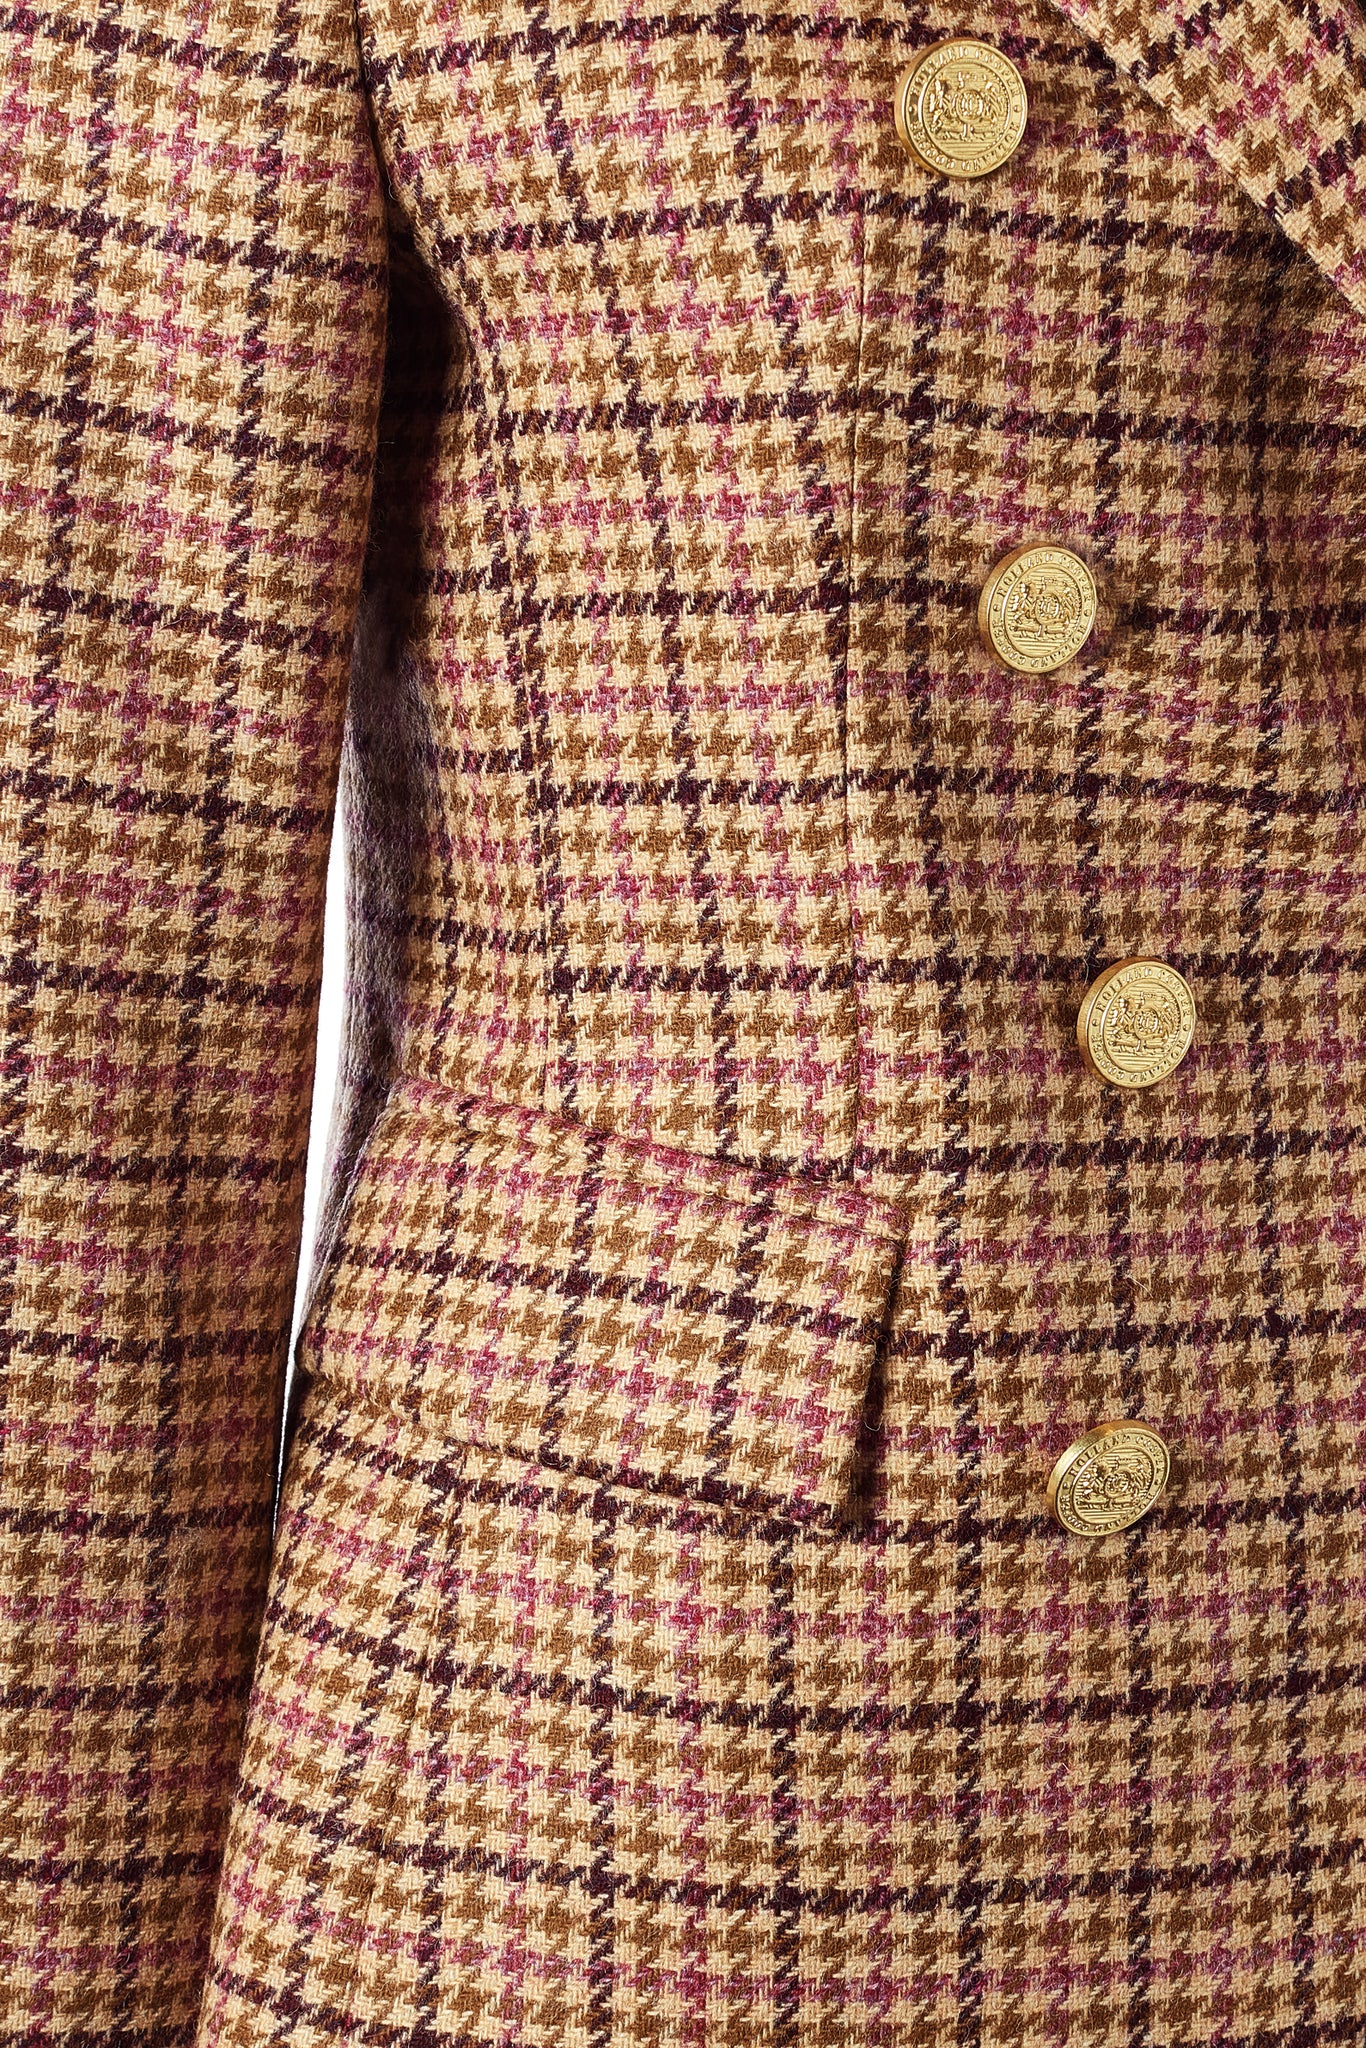 detail of front pockets and gold buttons on British made double breasted blazer that fastens with a single button hole to create a more form fitting silhouette with two pockets and gold button detailing this blazer is made from pink purple and brown check houndstooth fabric